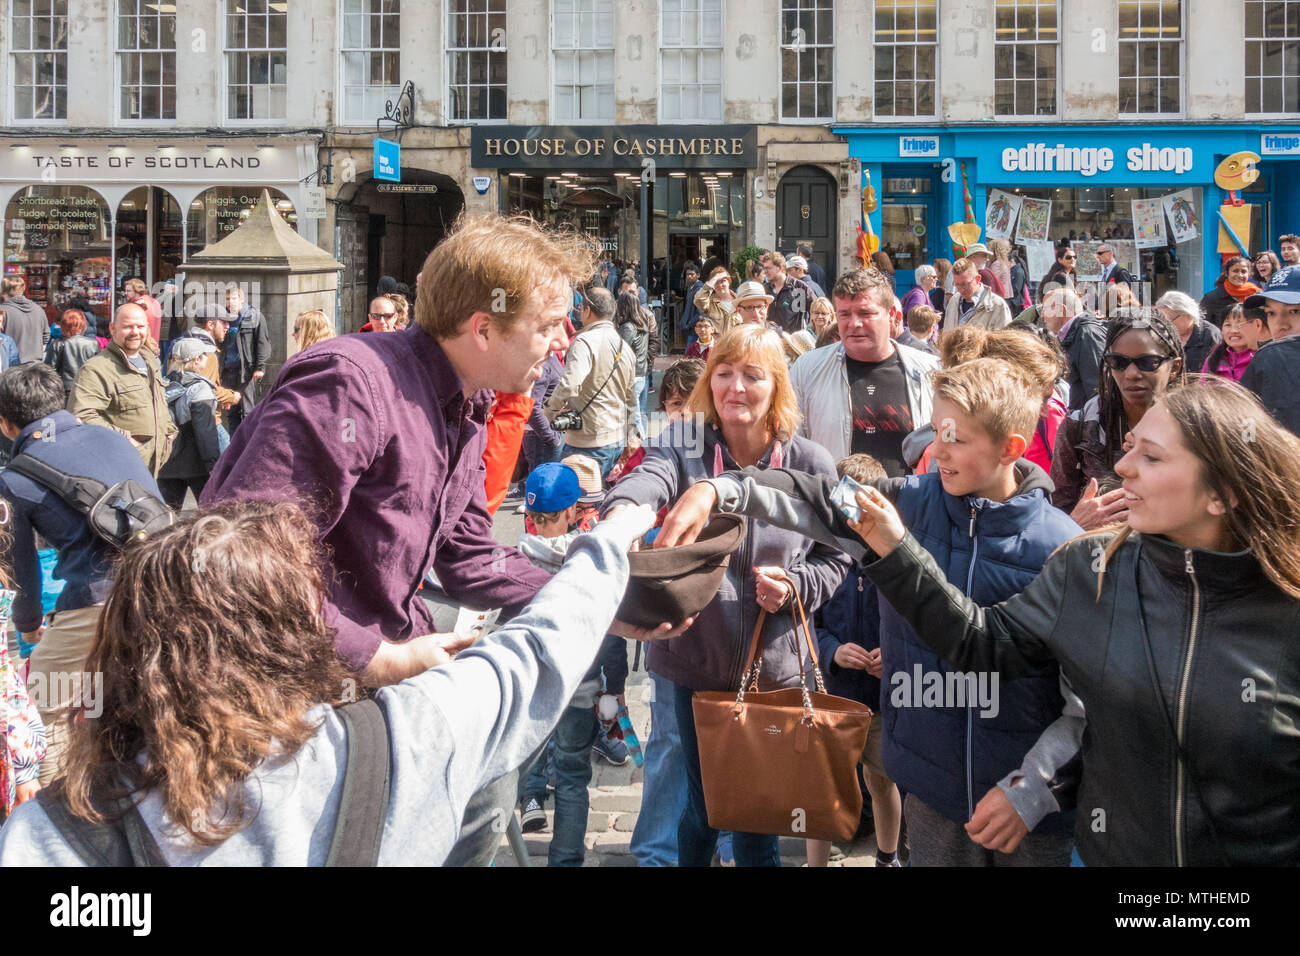 enthusiastic crowd of people paying giving money to a street performer on the Royal Mile, Edinburgh, Scotland, UK Stock Photo